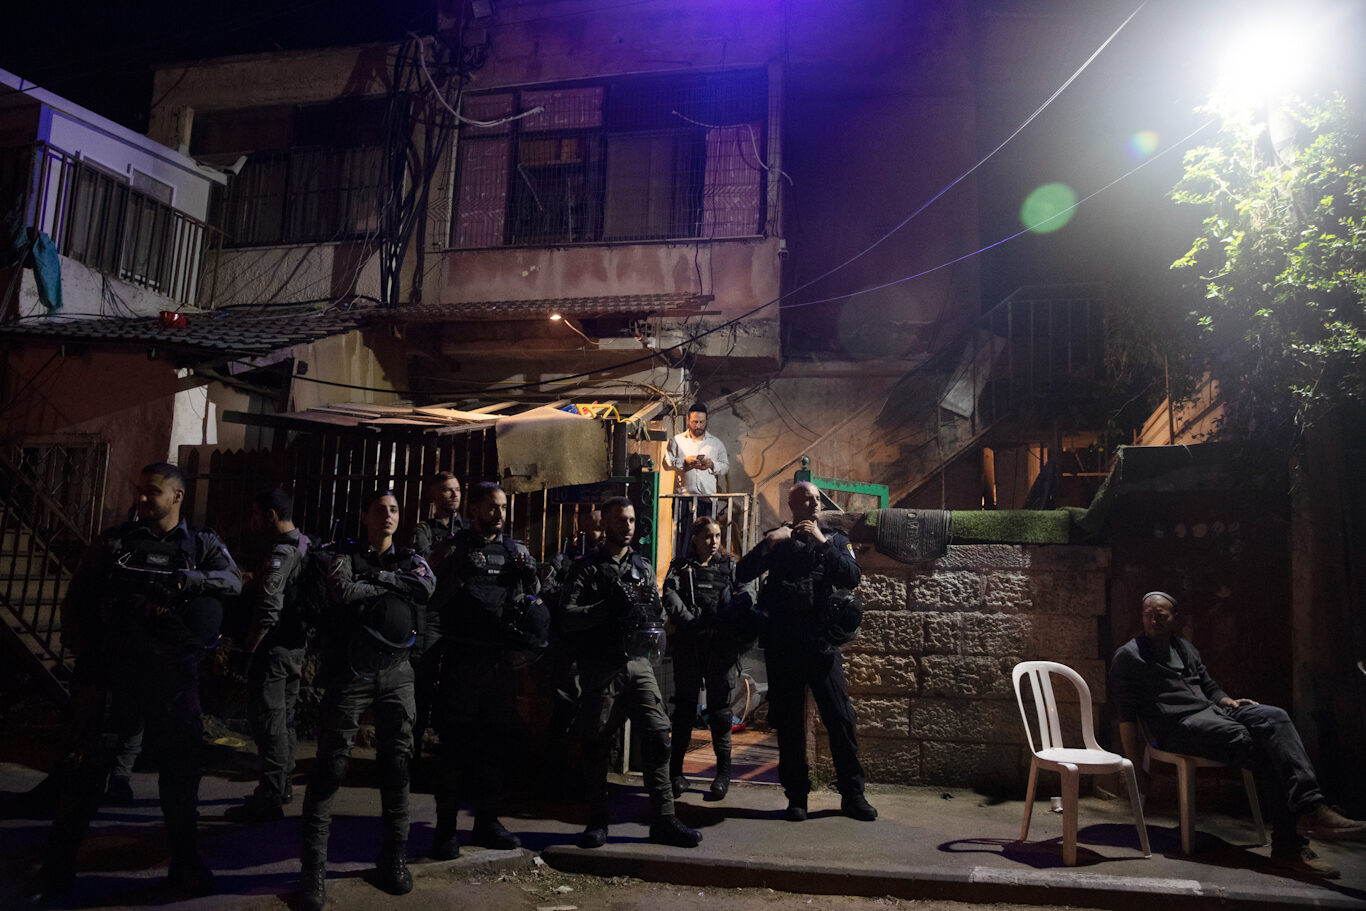 Israeli police guard a Palestinian home taken over by Jewish settlers in Sheikh Jarrah, May 5, 2021.